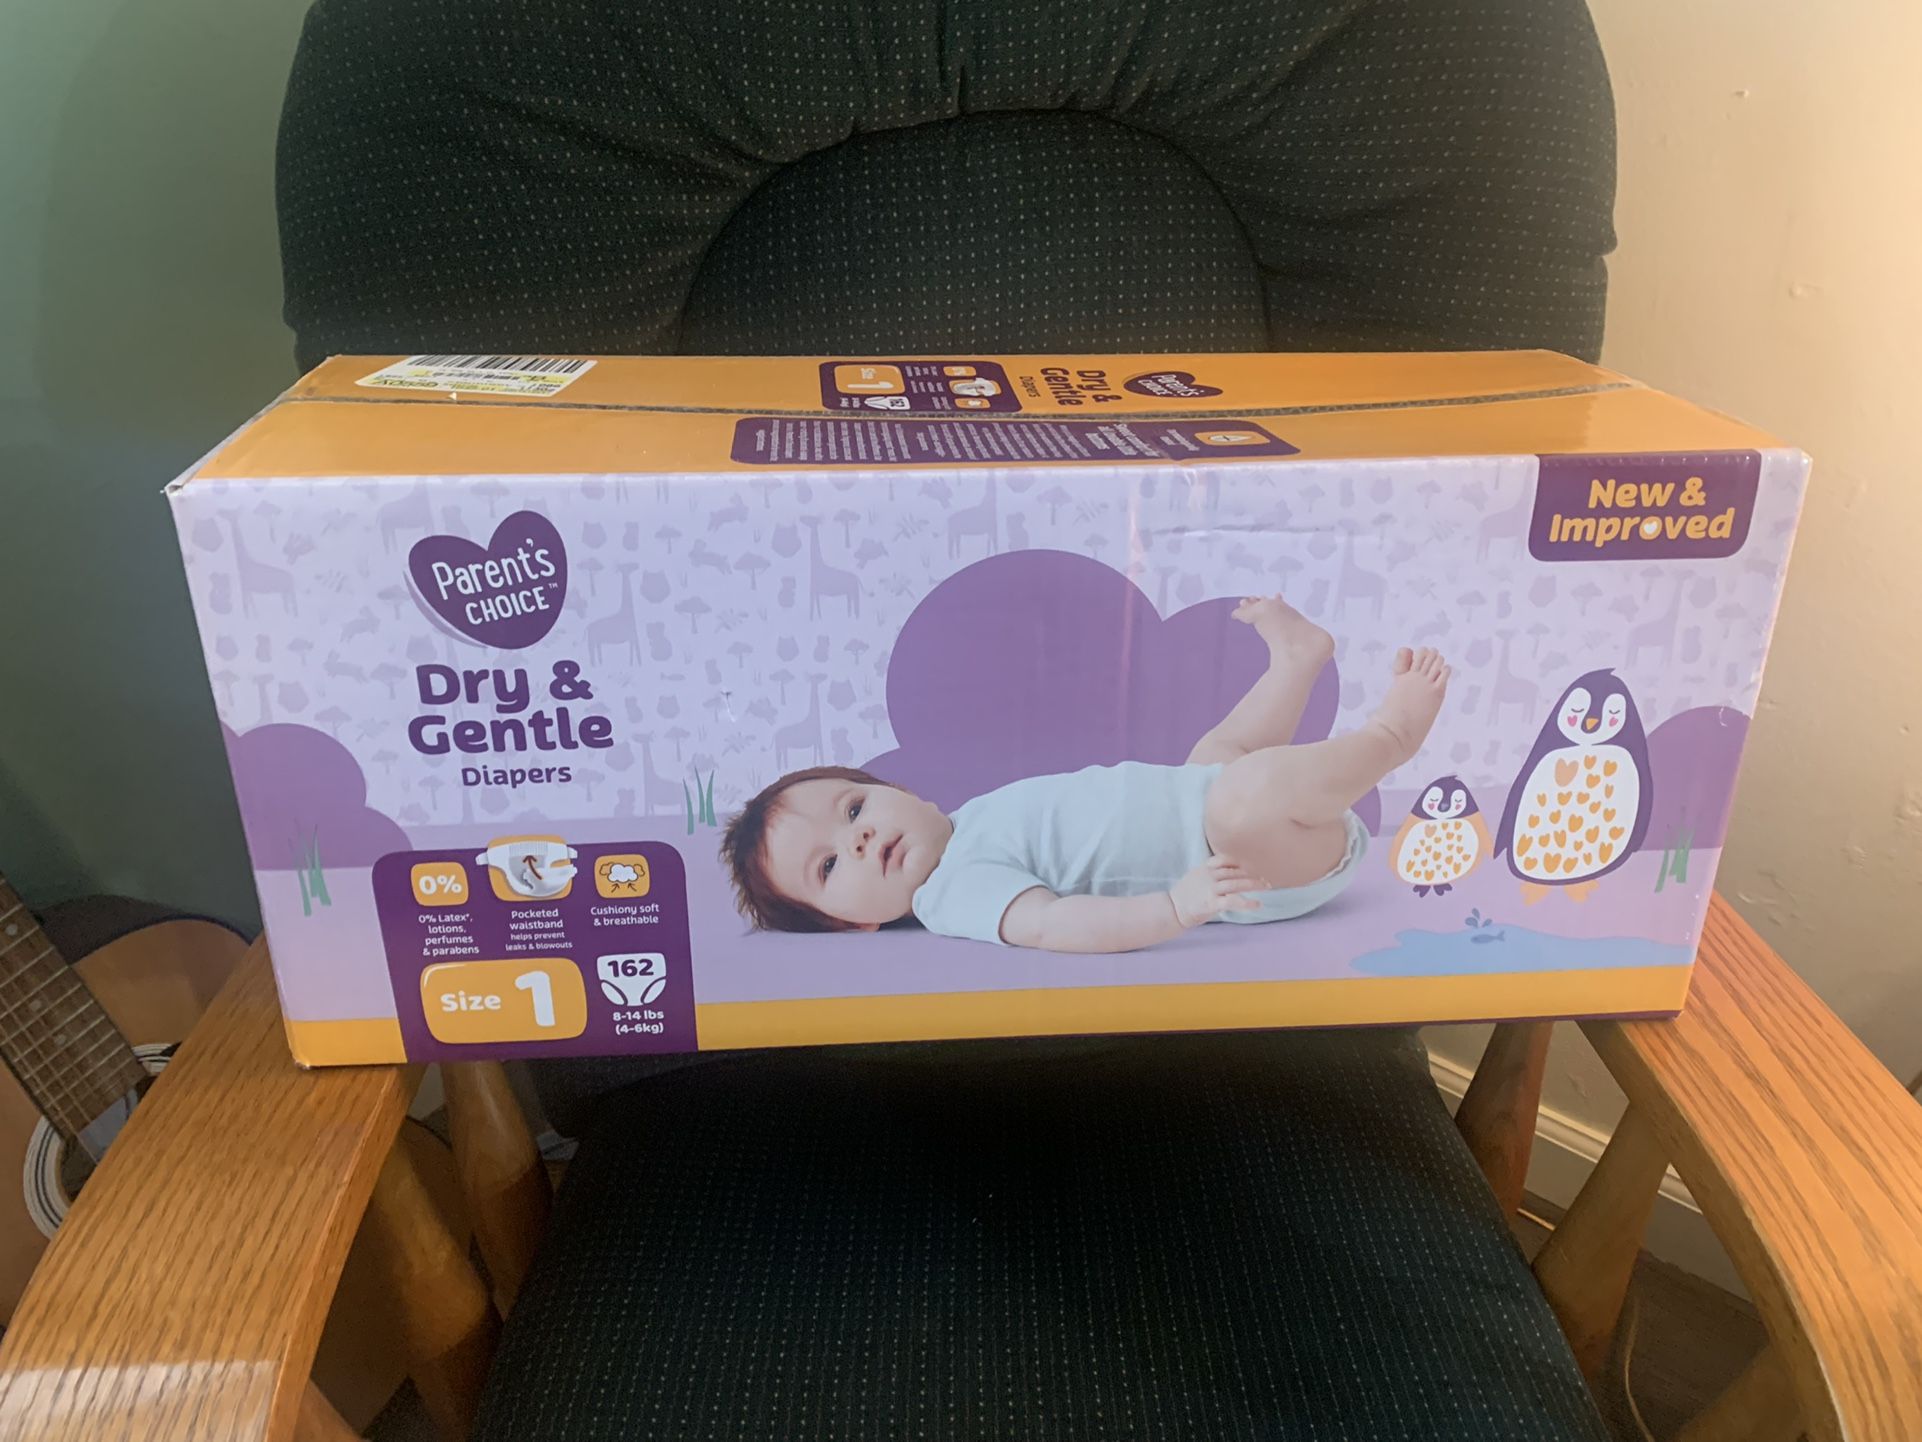 BRAND NEW NEVER OPENED! 162 Size 1 Diapers